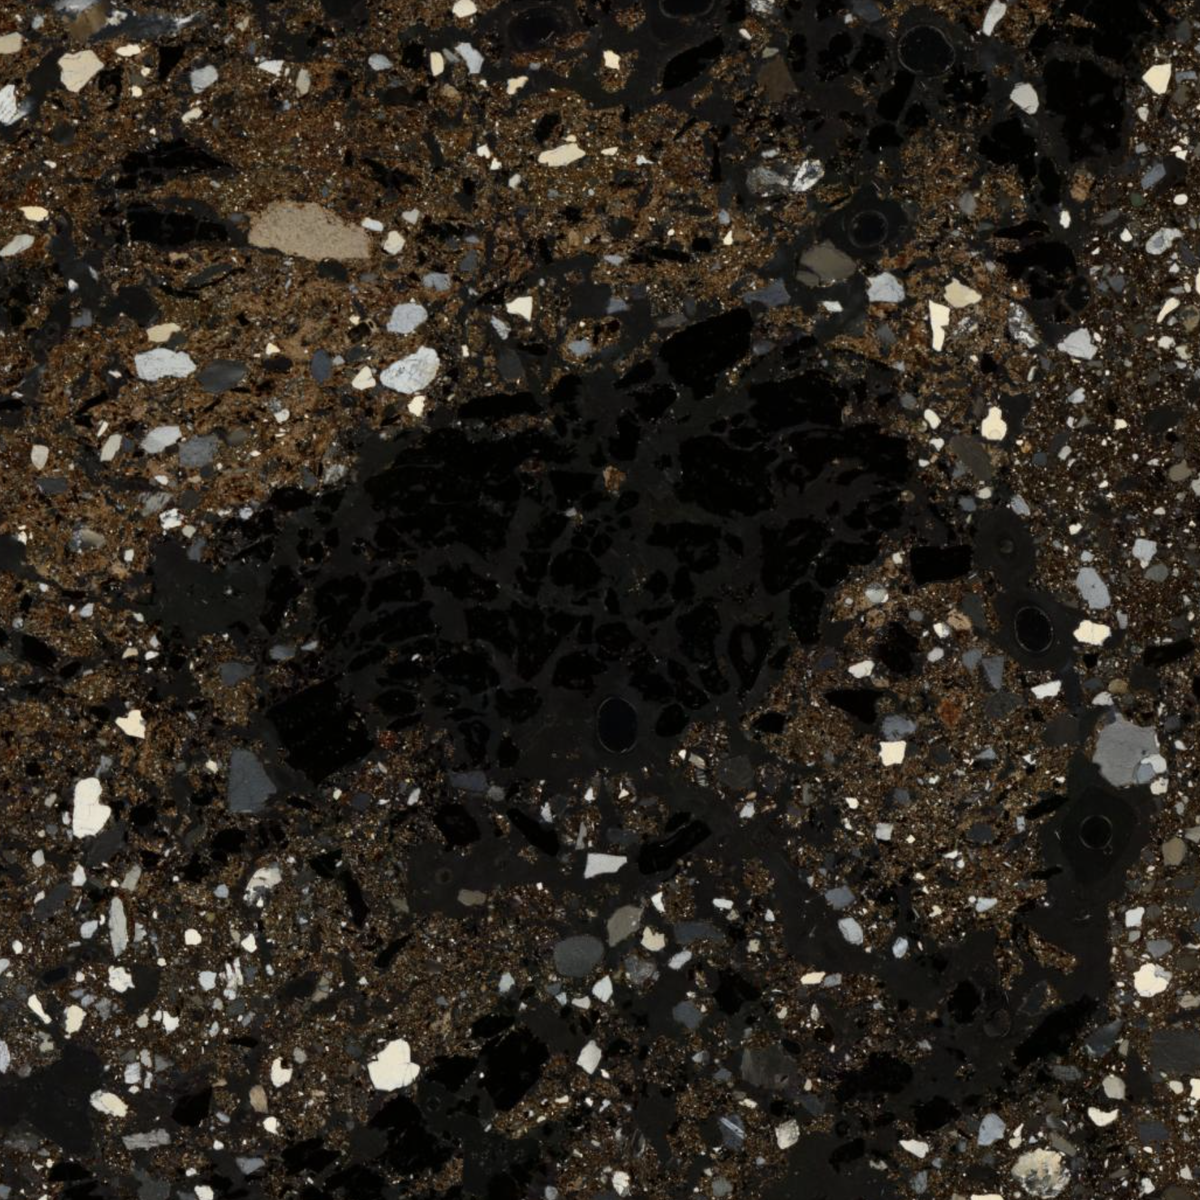 High magnification image of a piece of charcoal from an archaeological thin section.